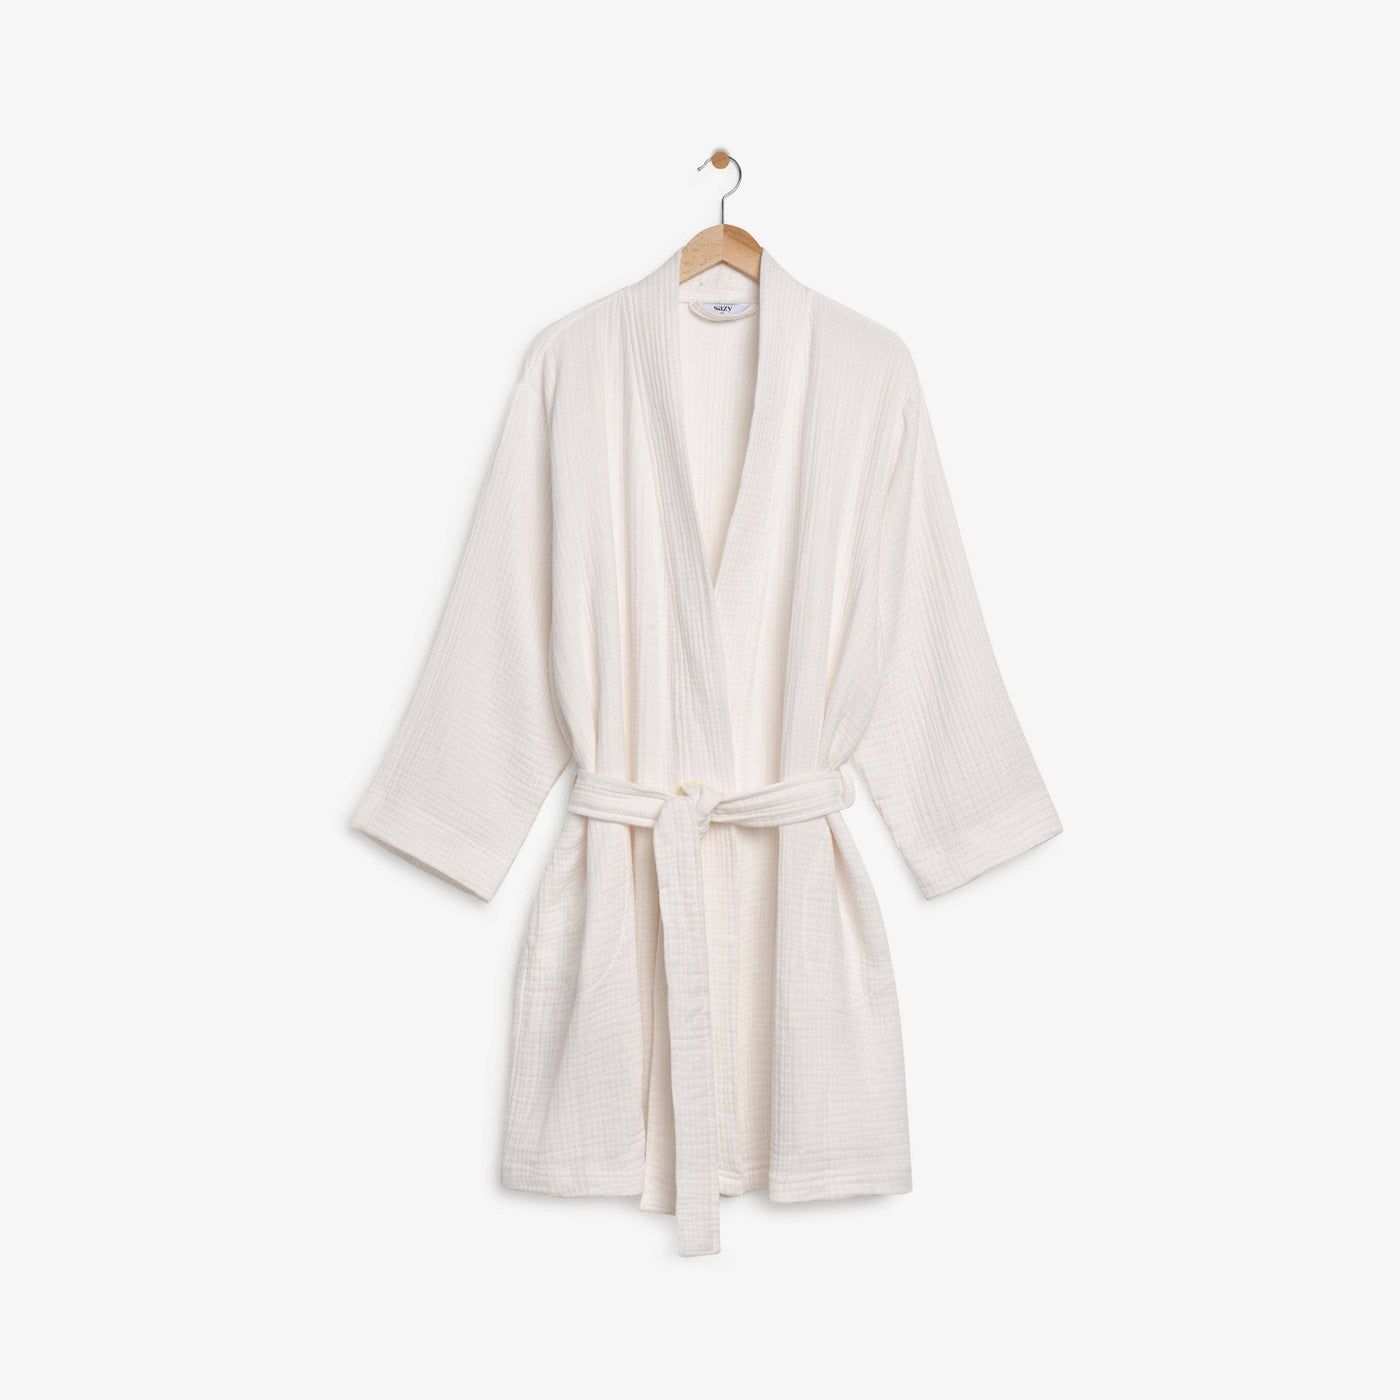 Rika Unisex 100% Turkish Cotton Dressing Gown, Off-White, L Dressing Gowns sazy.com